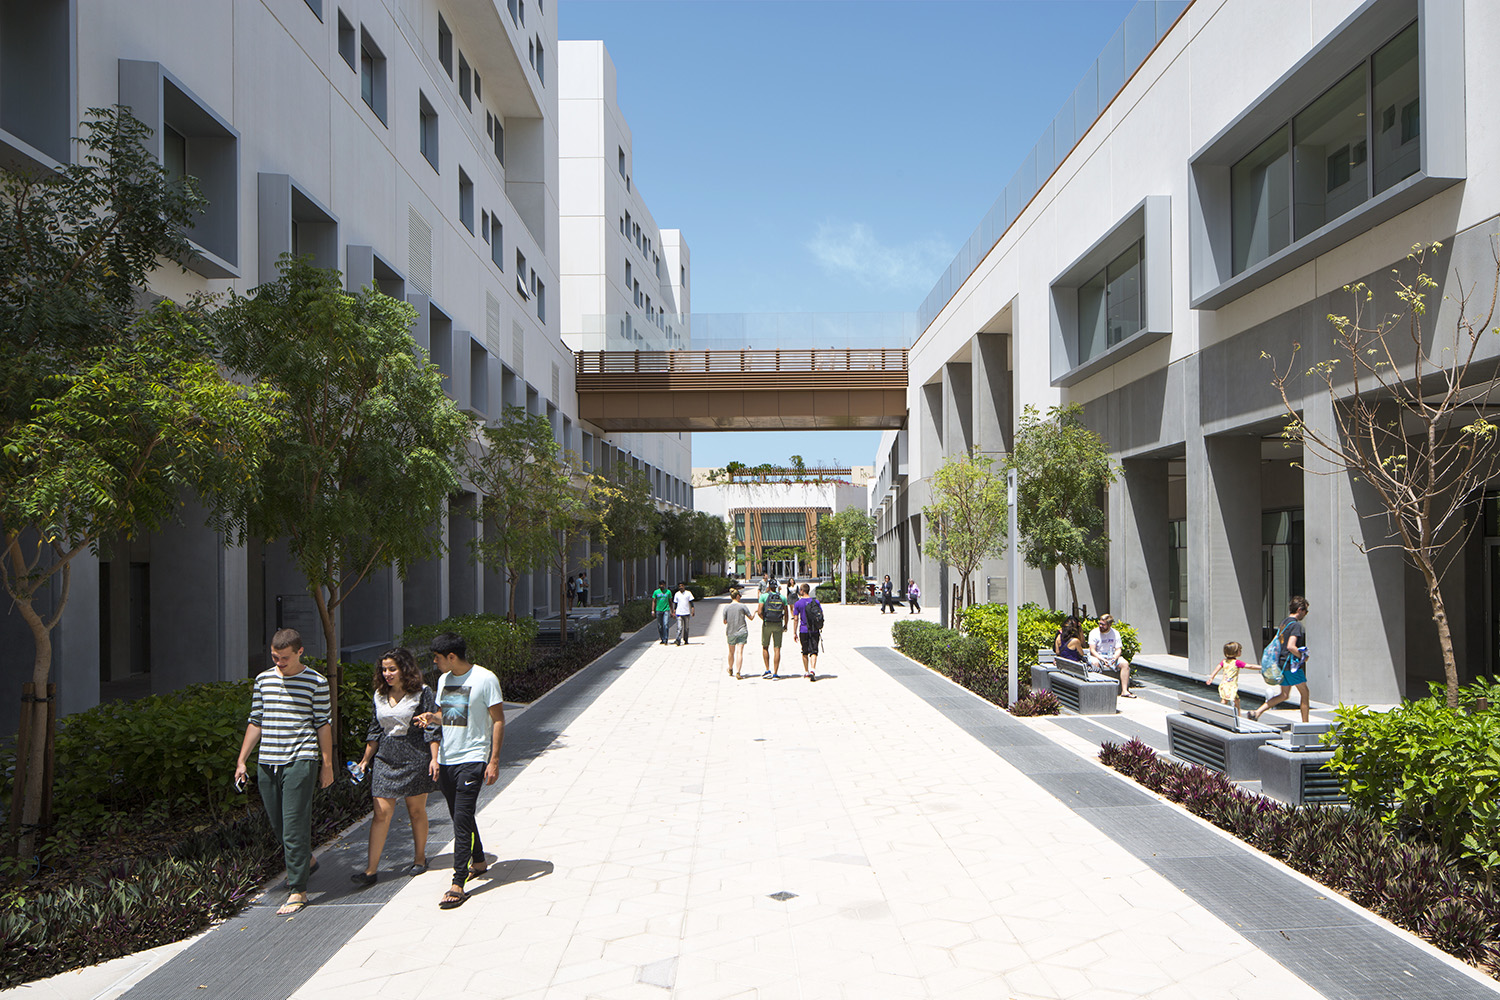 The main street is flanked by pedestrian colonnades, native landscaping, and traditional falaj-inspired water channels for year-round outdoor comfort. Bridges connect the north and south side of the High Line and span over the main street 